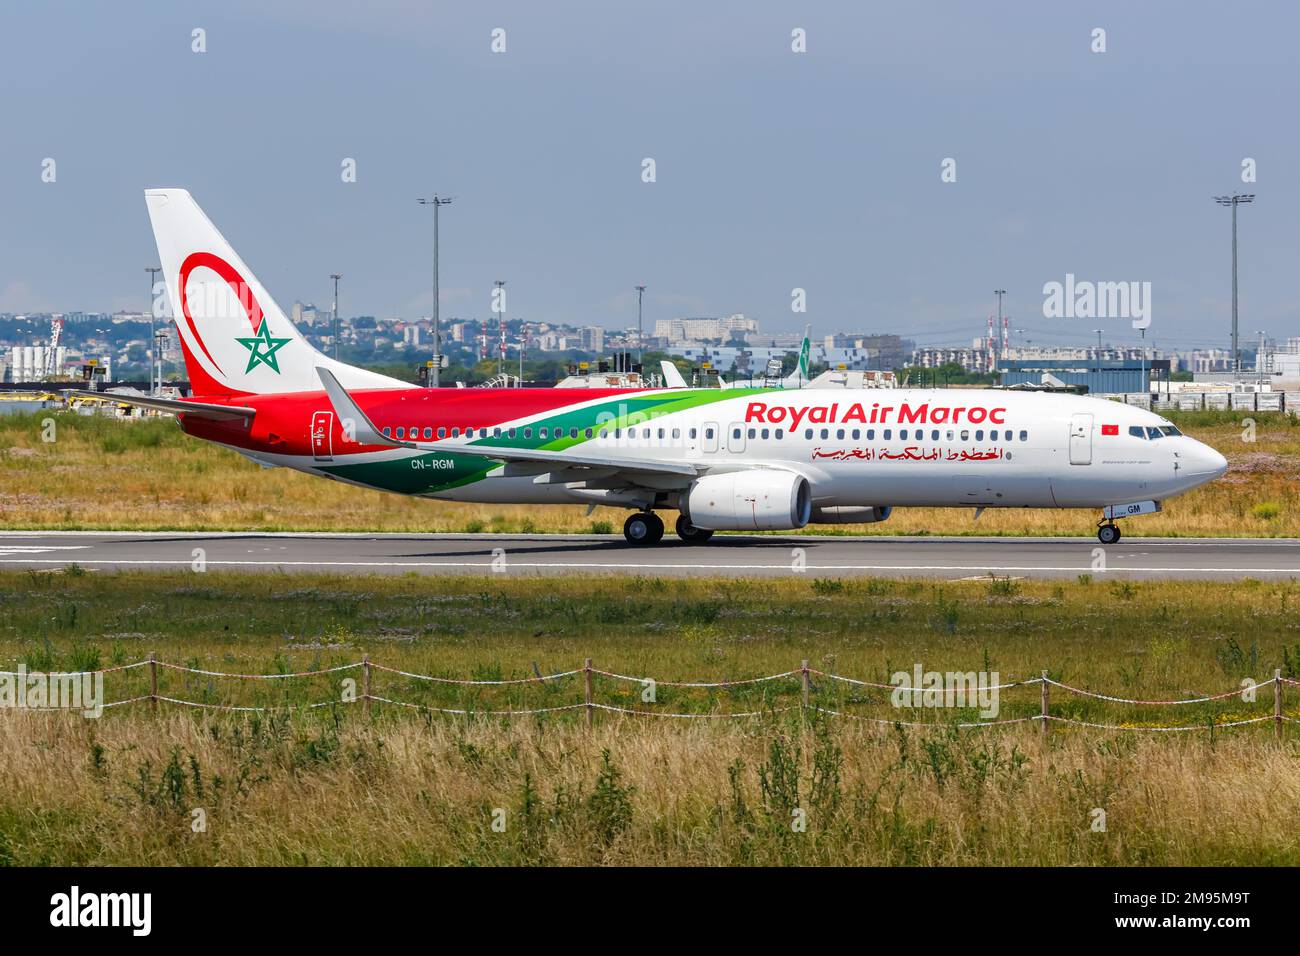 Paris, France - June 4, 2022: Royal Air Maroc Boeing 737-800 airplane at Paris Orly airport (ORY) in France. Stock Photo